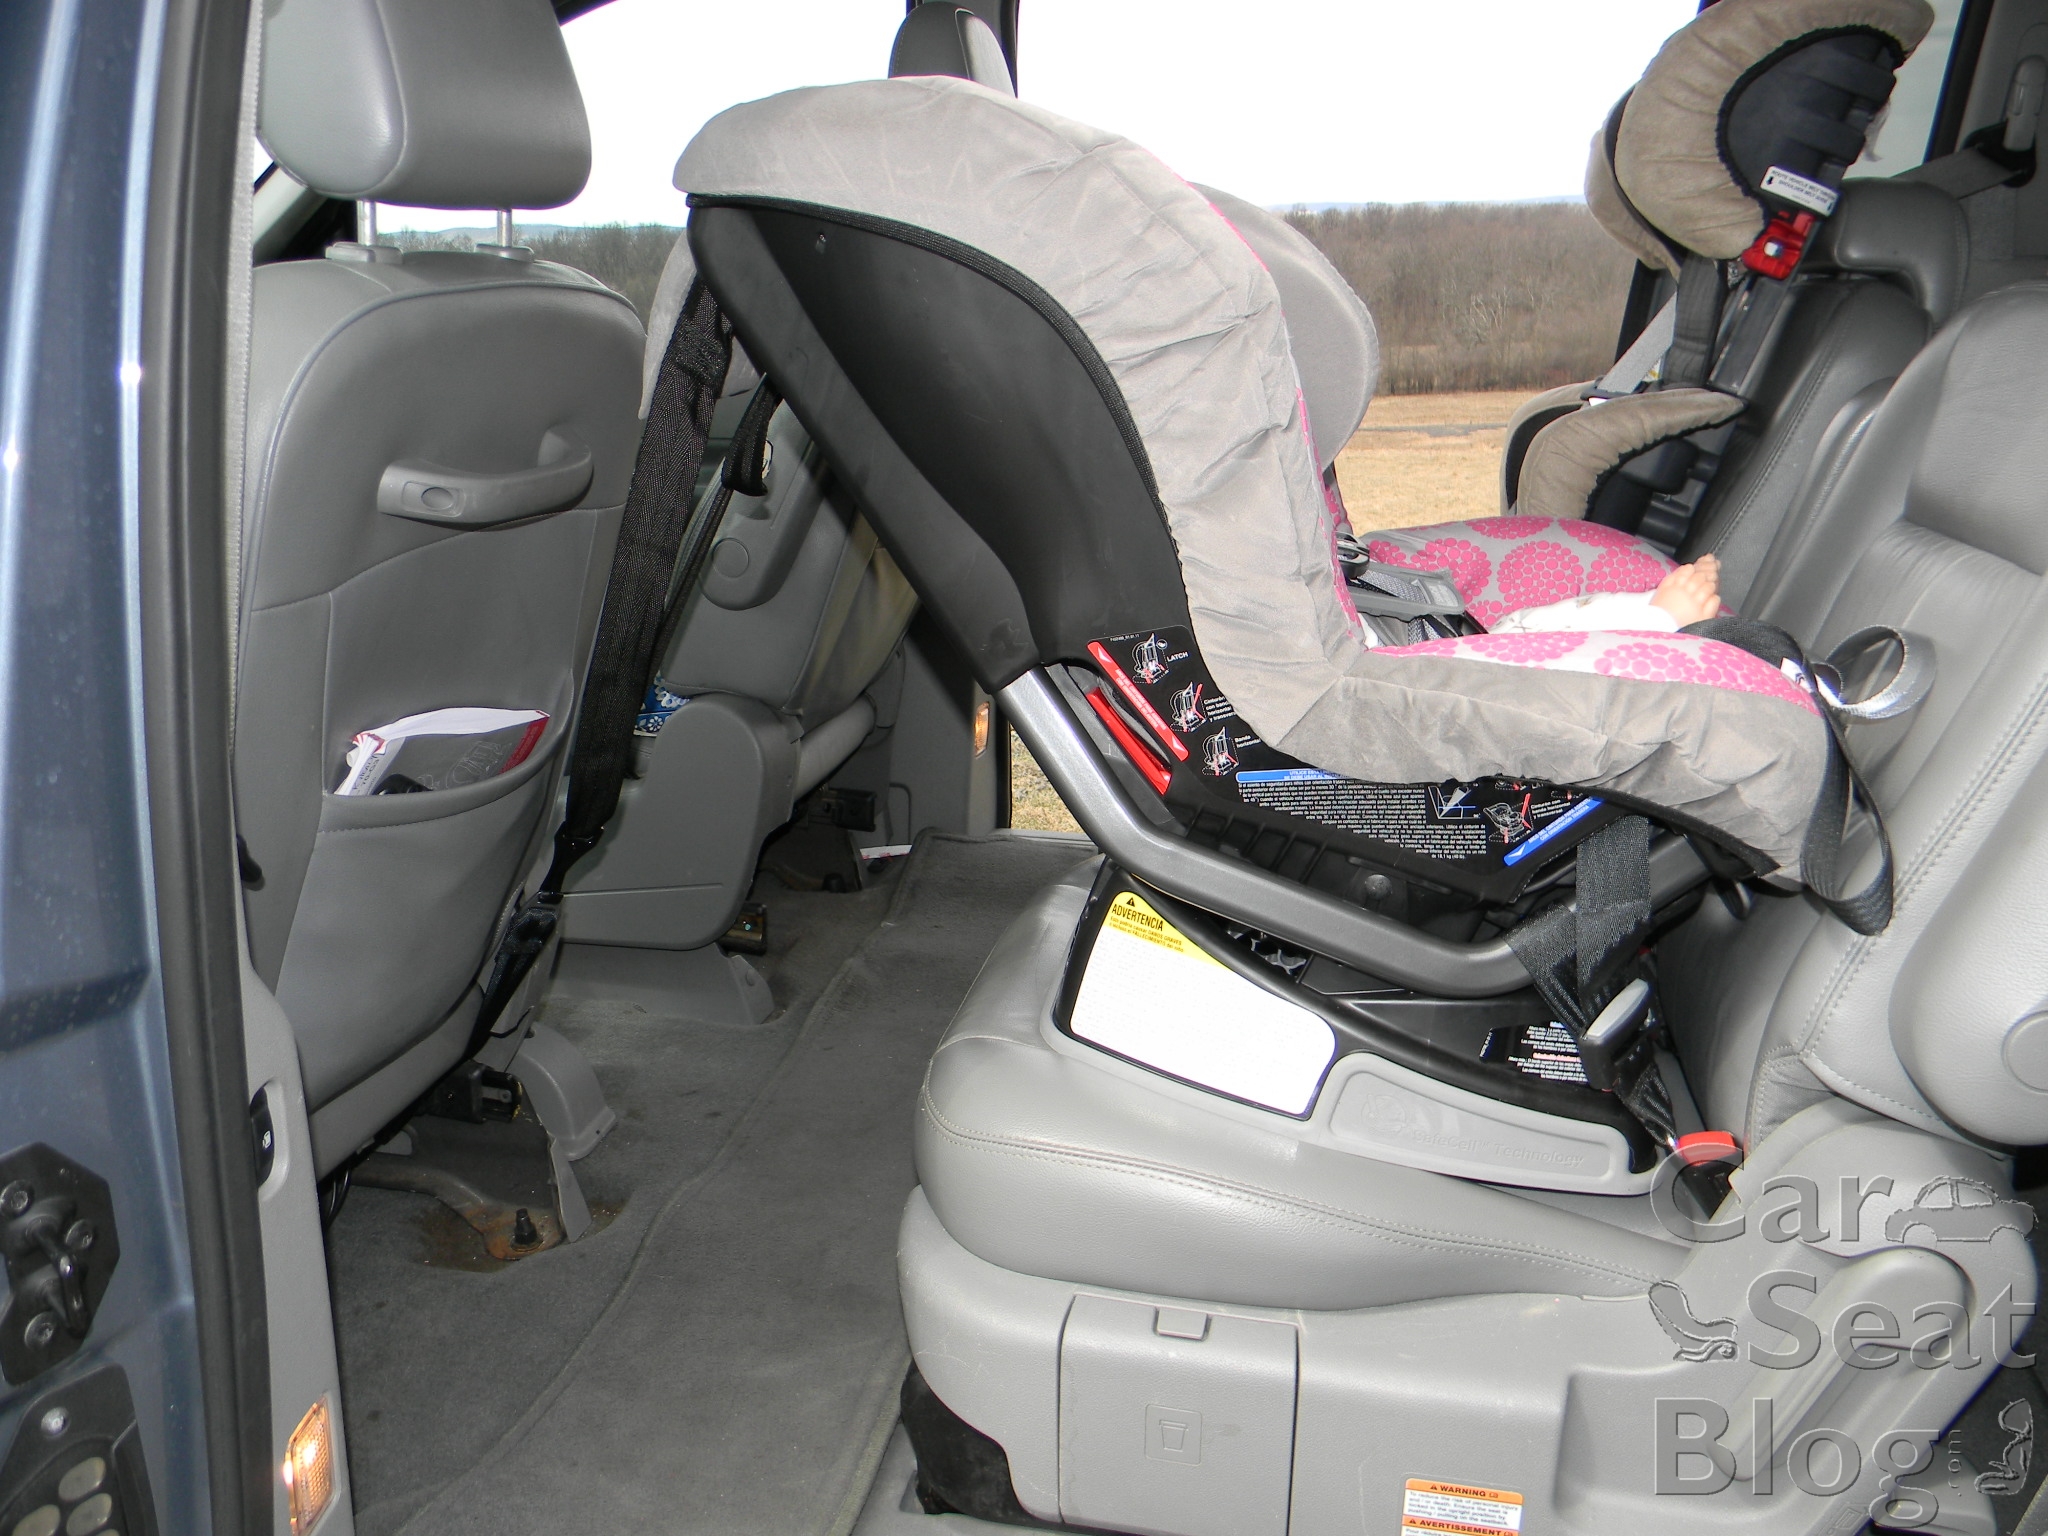 CarseatBlog: The Most Trusted Source for Car Seat Reviews, Ratings